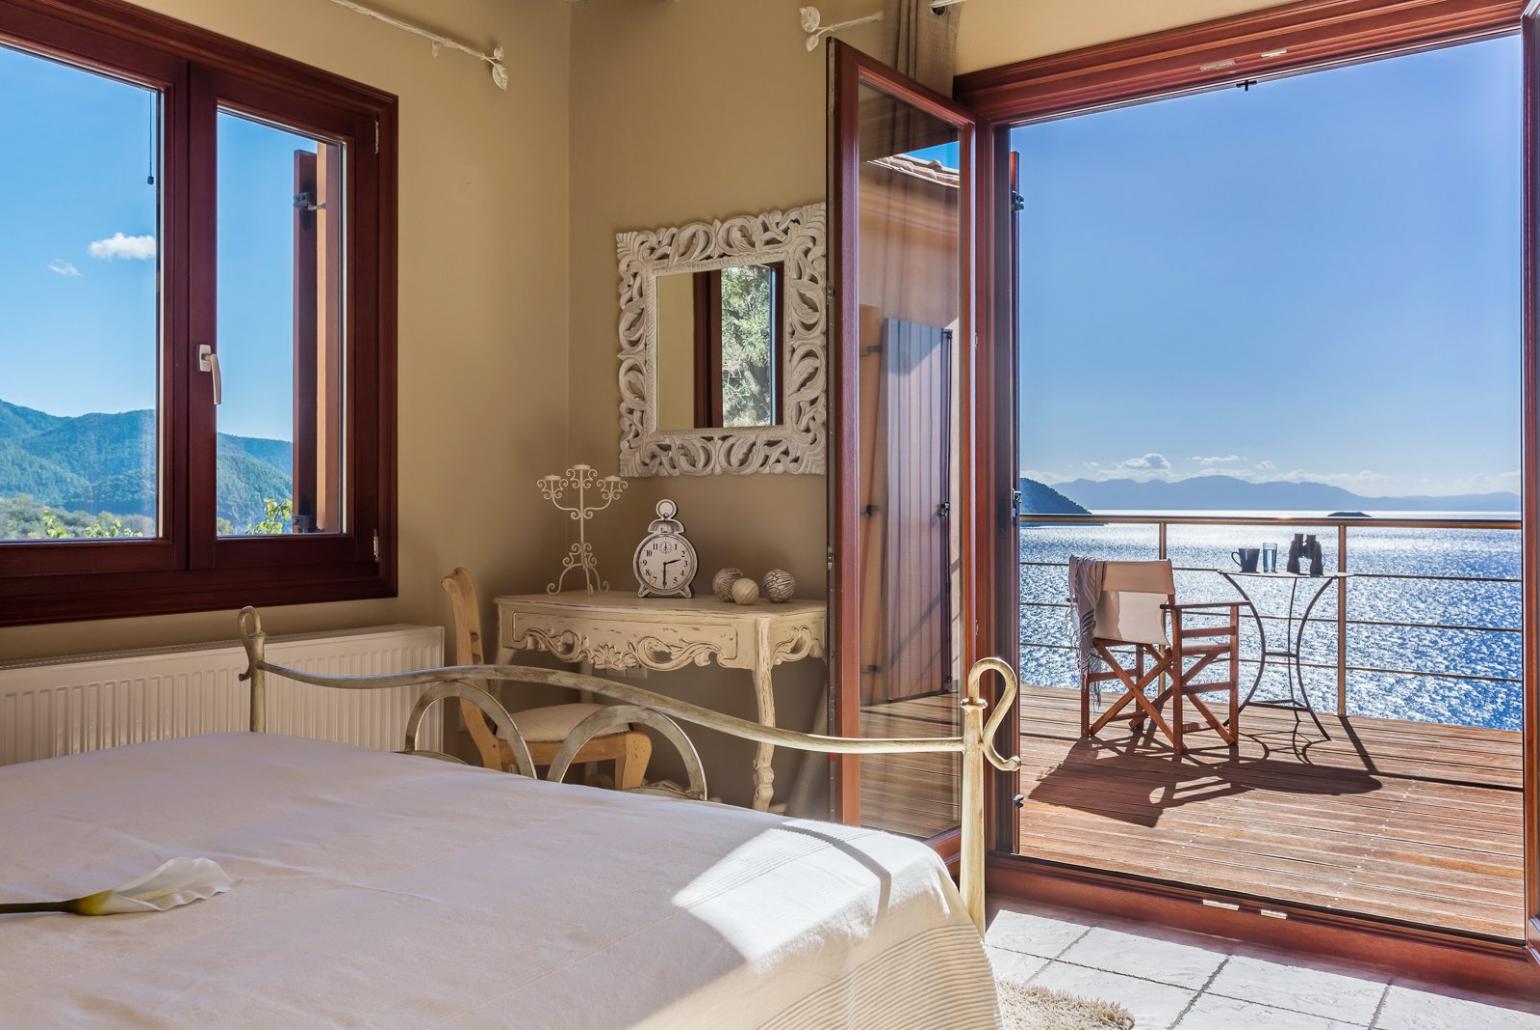 Double bedroom with terrace access and sea view